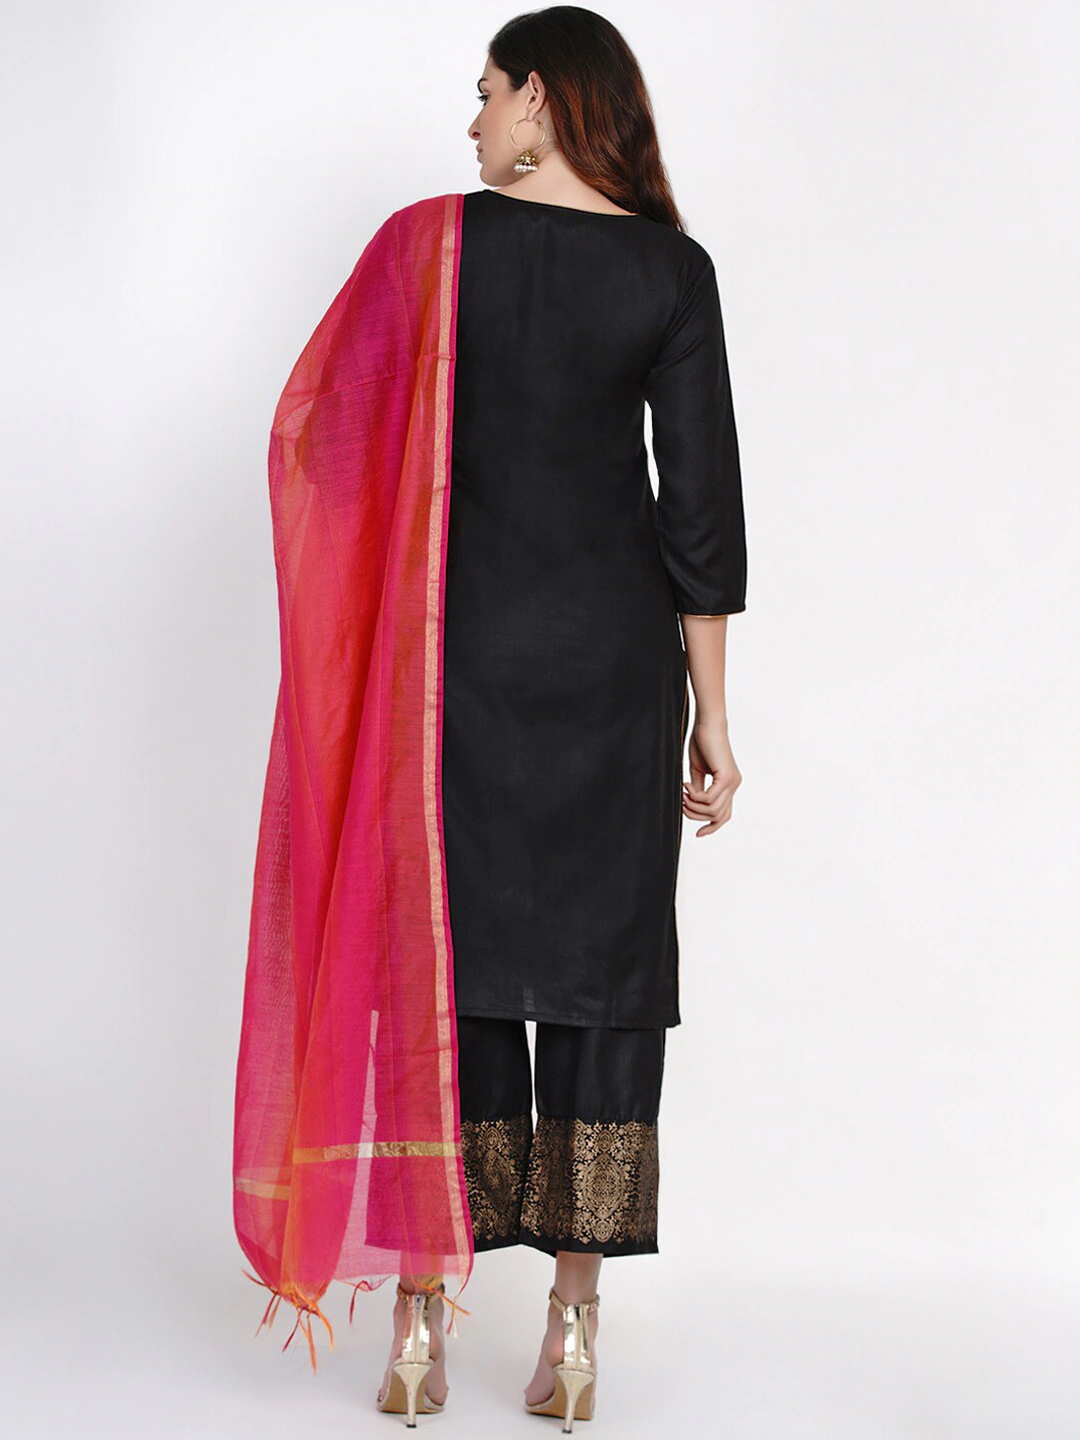 Women's Black And Golden Embroidered Kurta With Palazzos And Dupatta - Bhama Couture